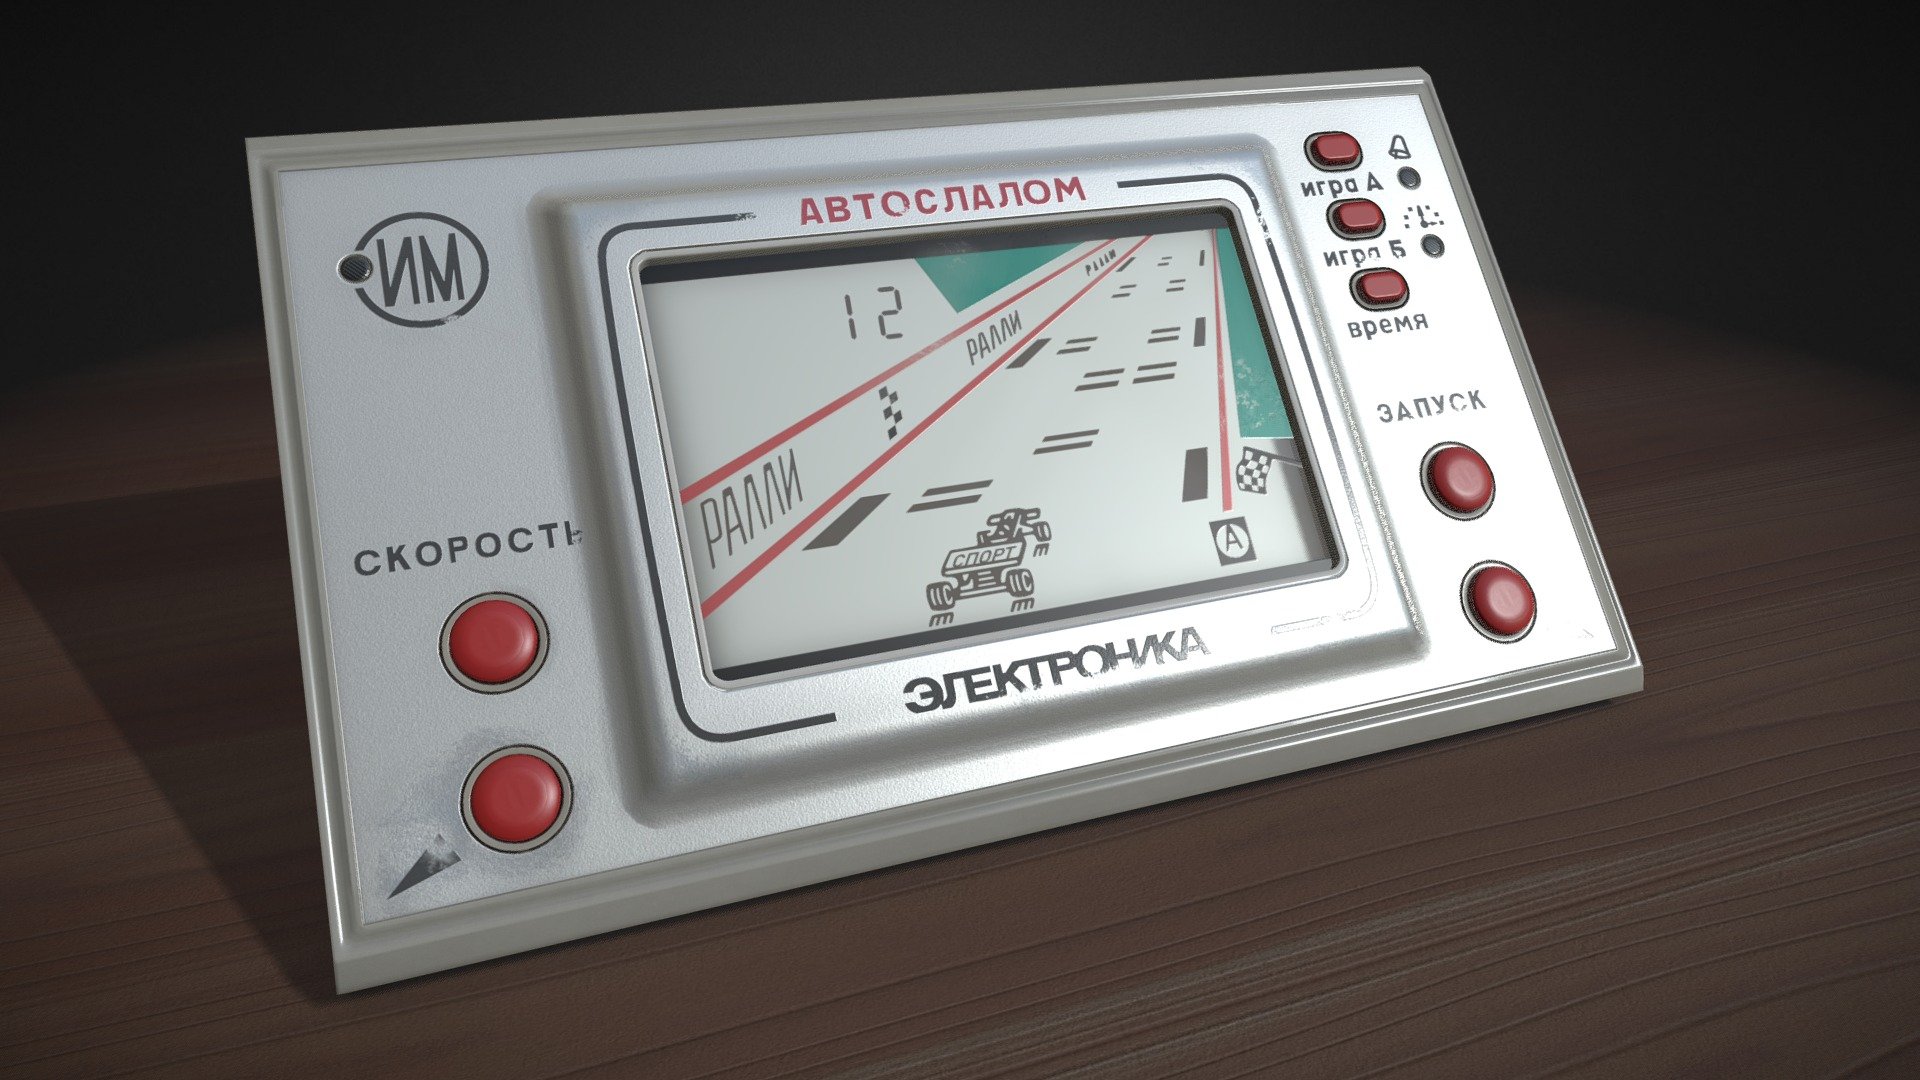 A toy of my childhood. Game of the 1990s in the USSR.
Очень похоже на &ldquo;Nintendo Game &amp; Watch